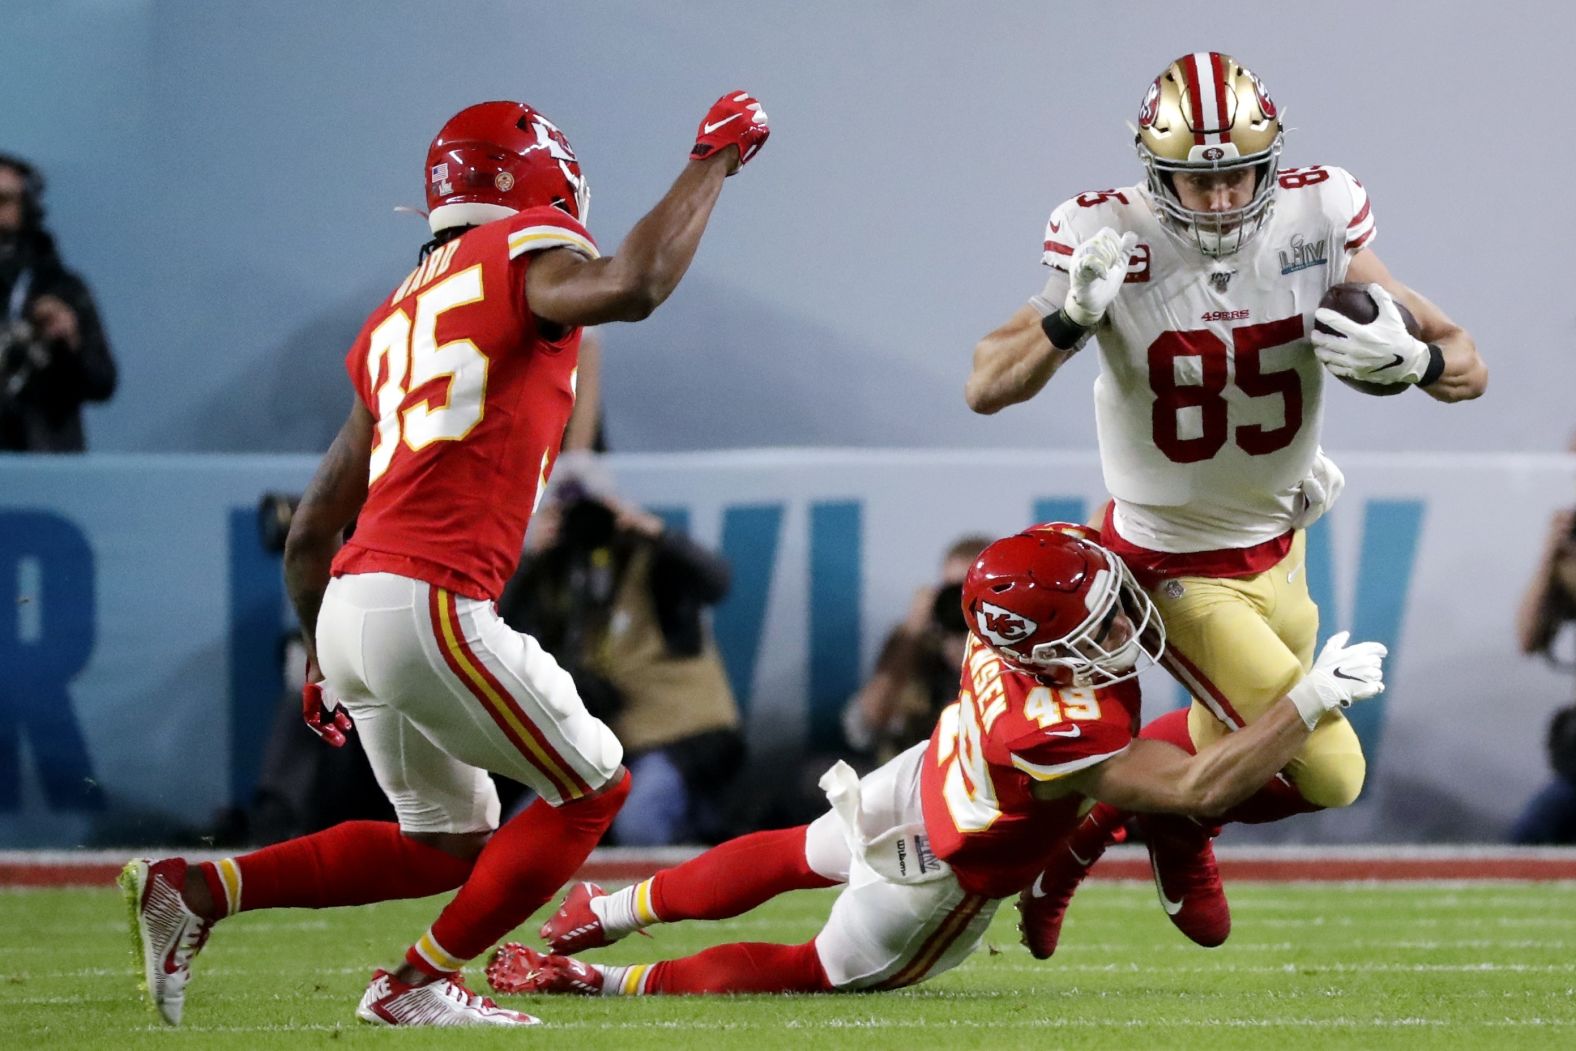 San Francisco tight end George Kittle is tackled by Daniel Sorensen in the first quarter.